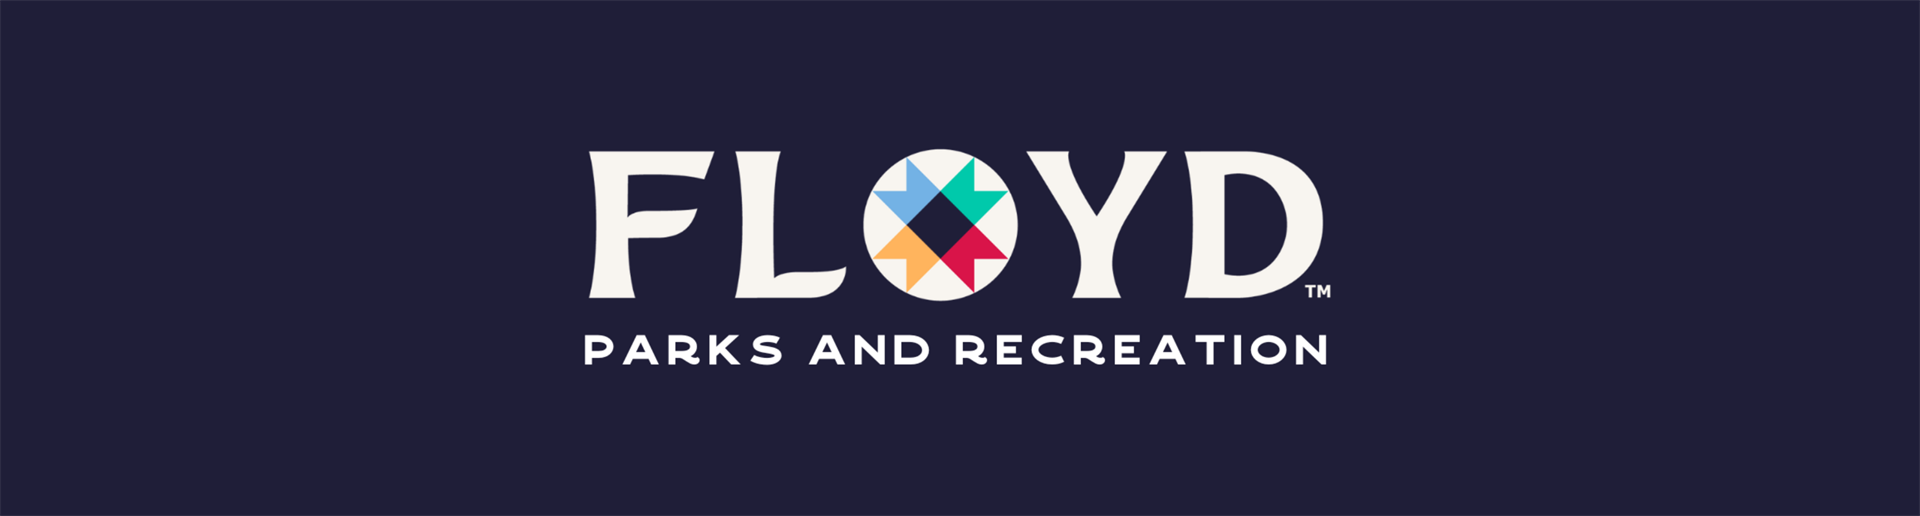 Floyd County Parks and Recreation